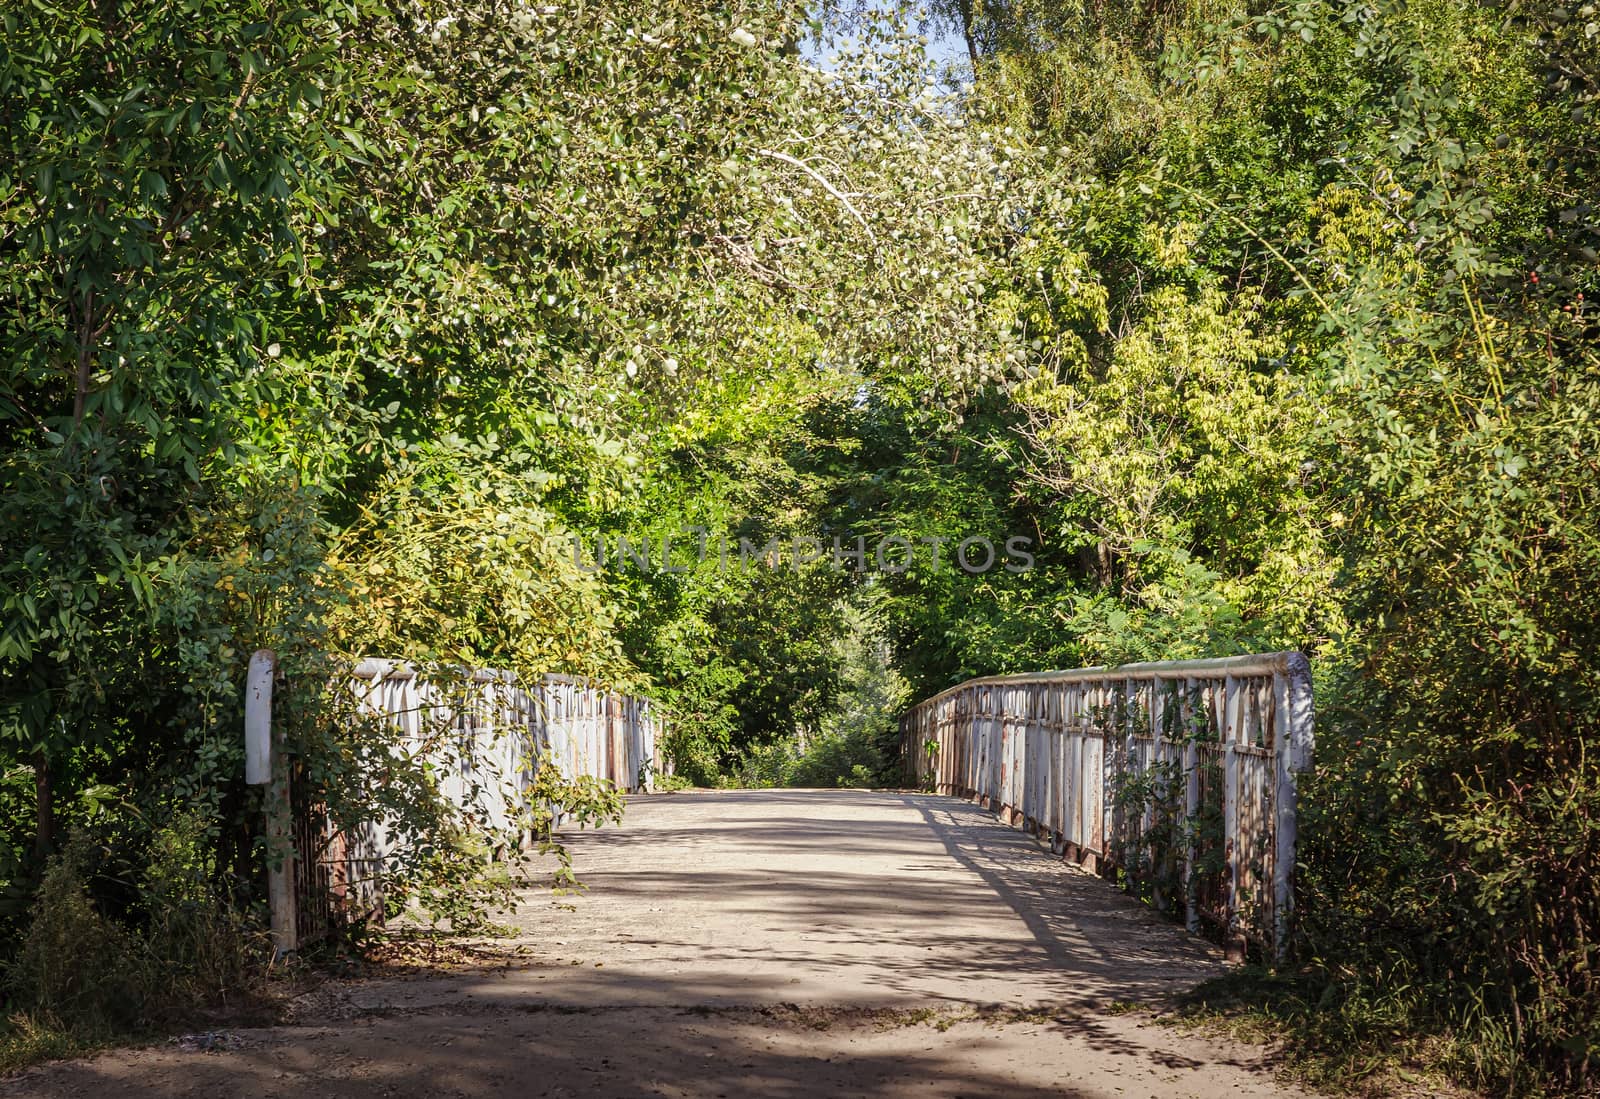 A bridge through the trees in the Ukrainian country side, during summer